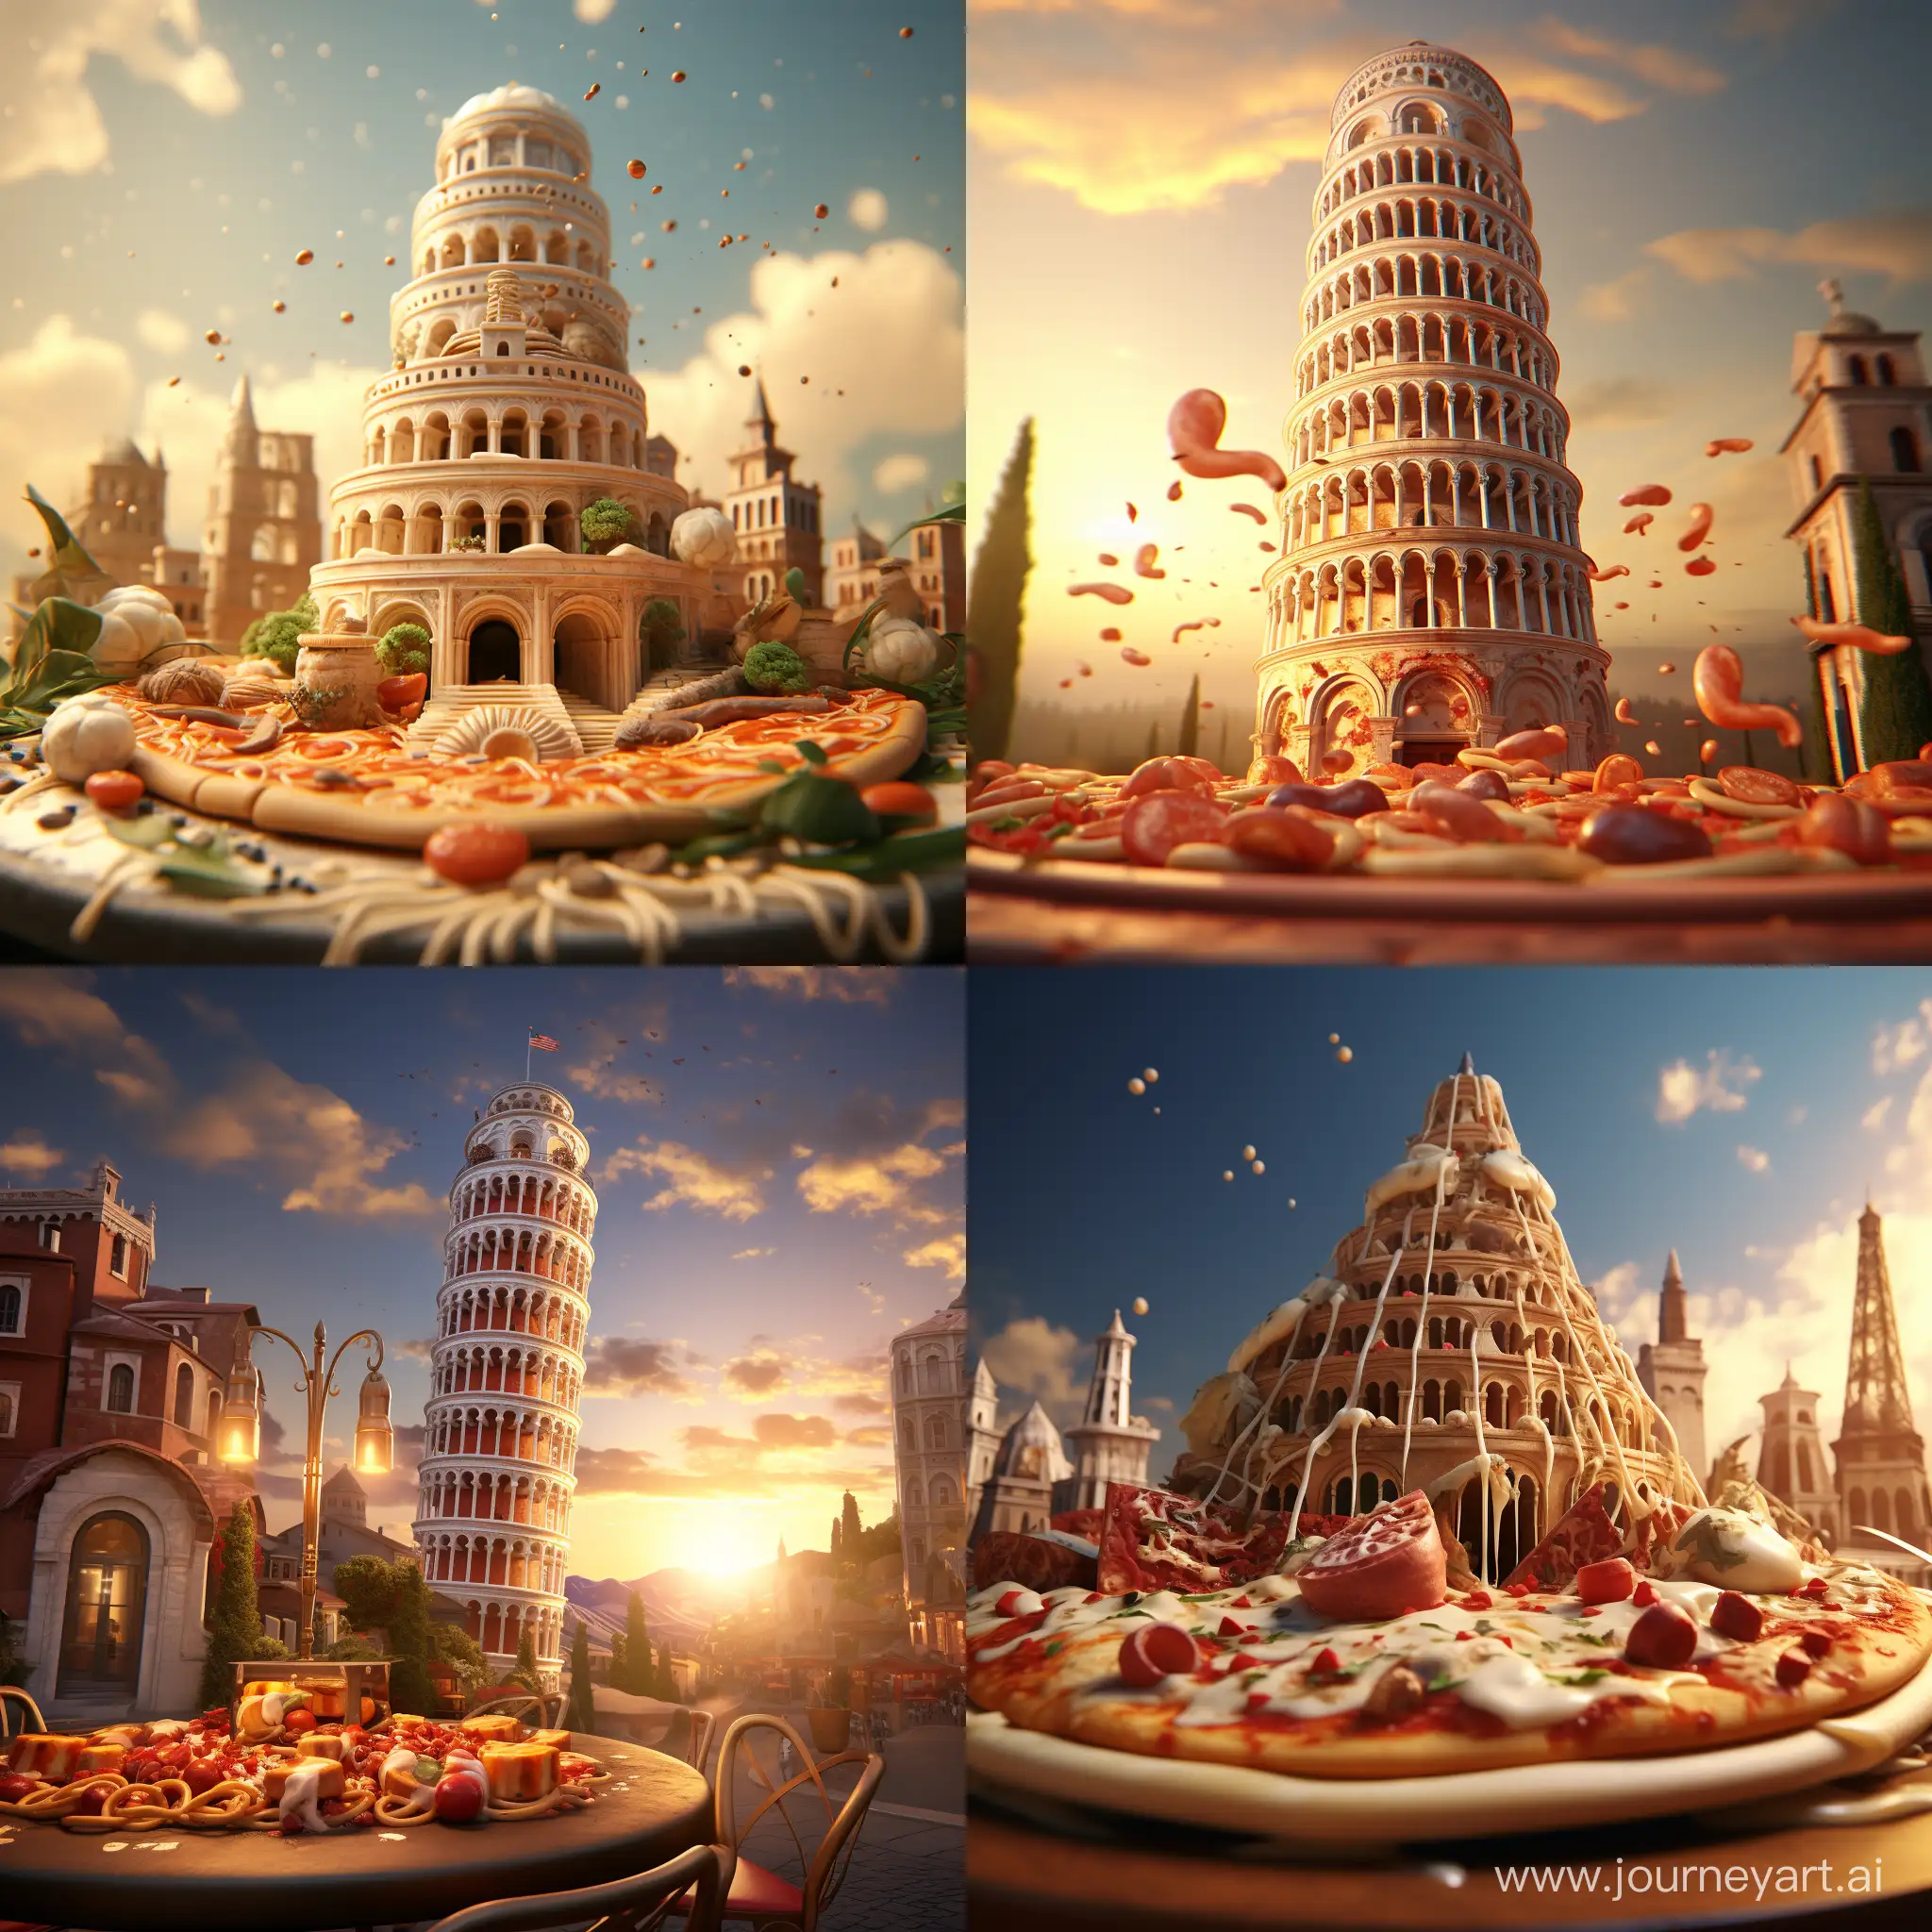 Delicious-Pizza-with-the-Leaning-Tower-of-Pisa-in-the-Background